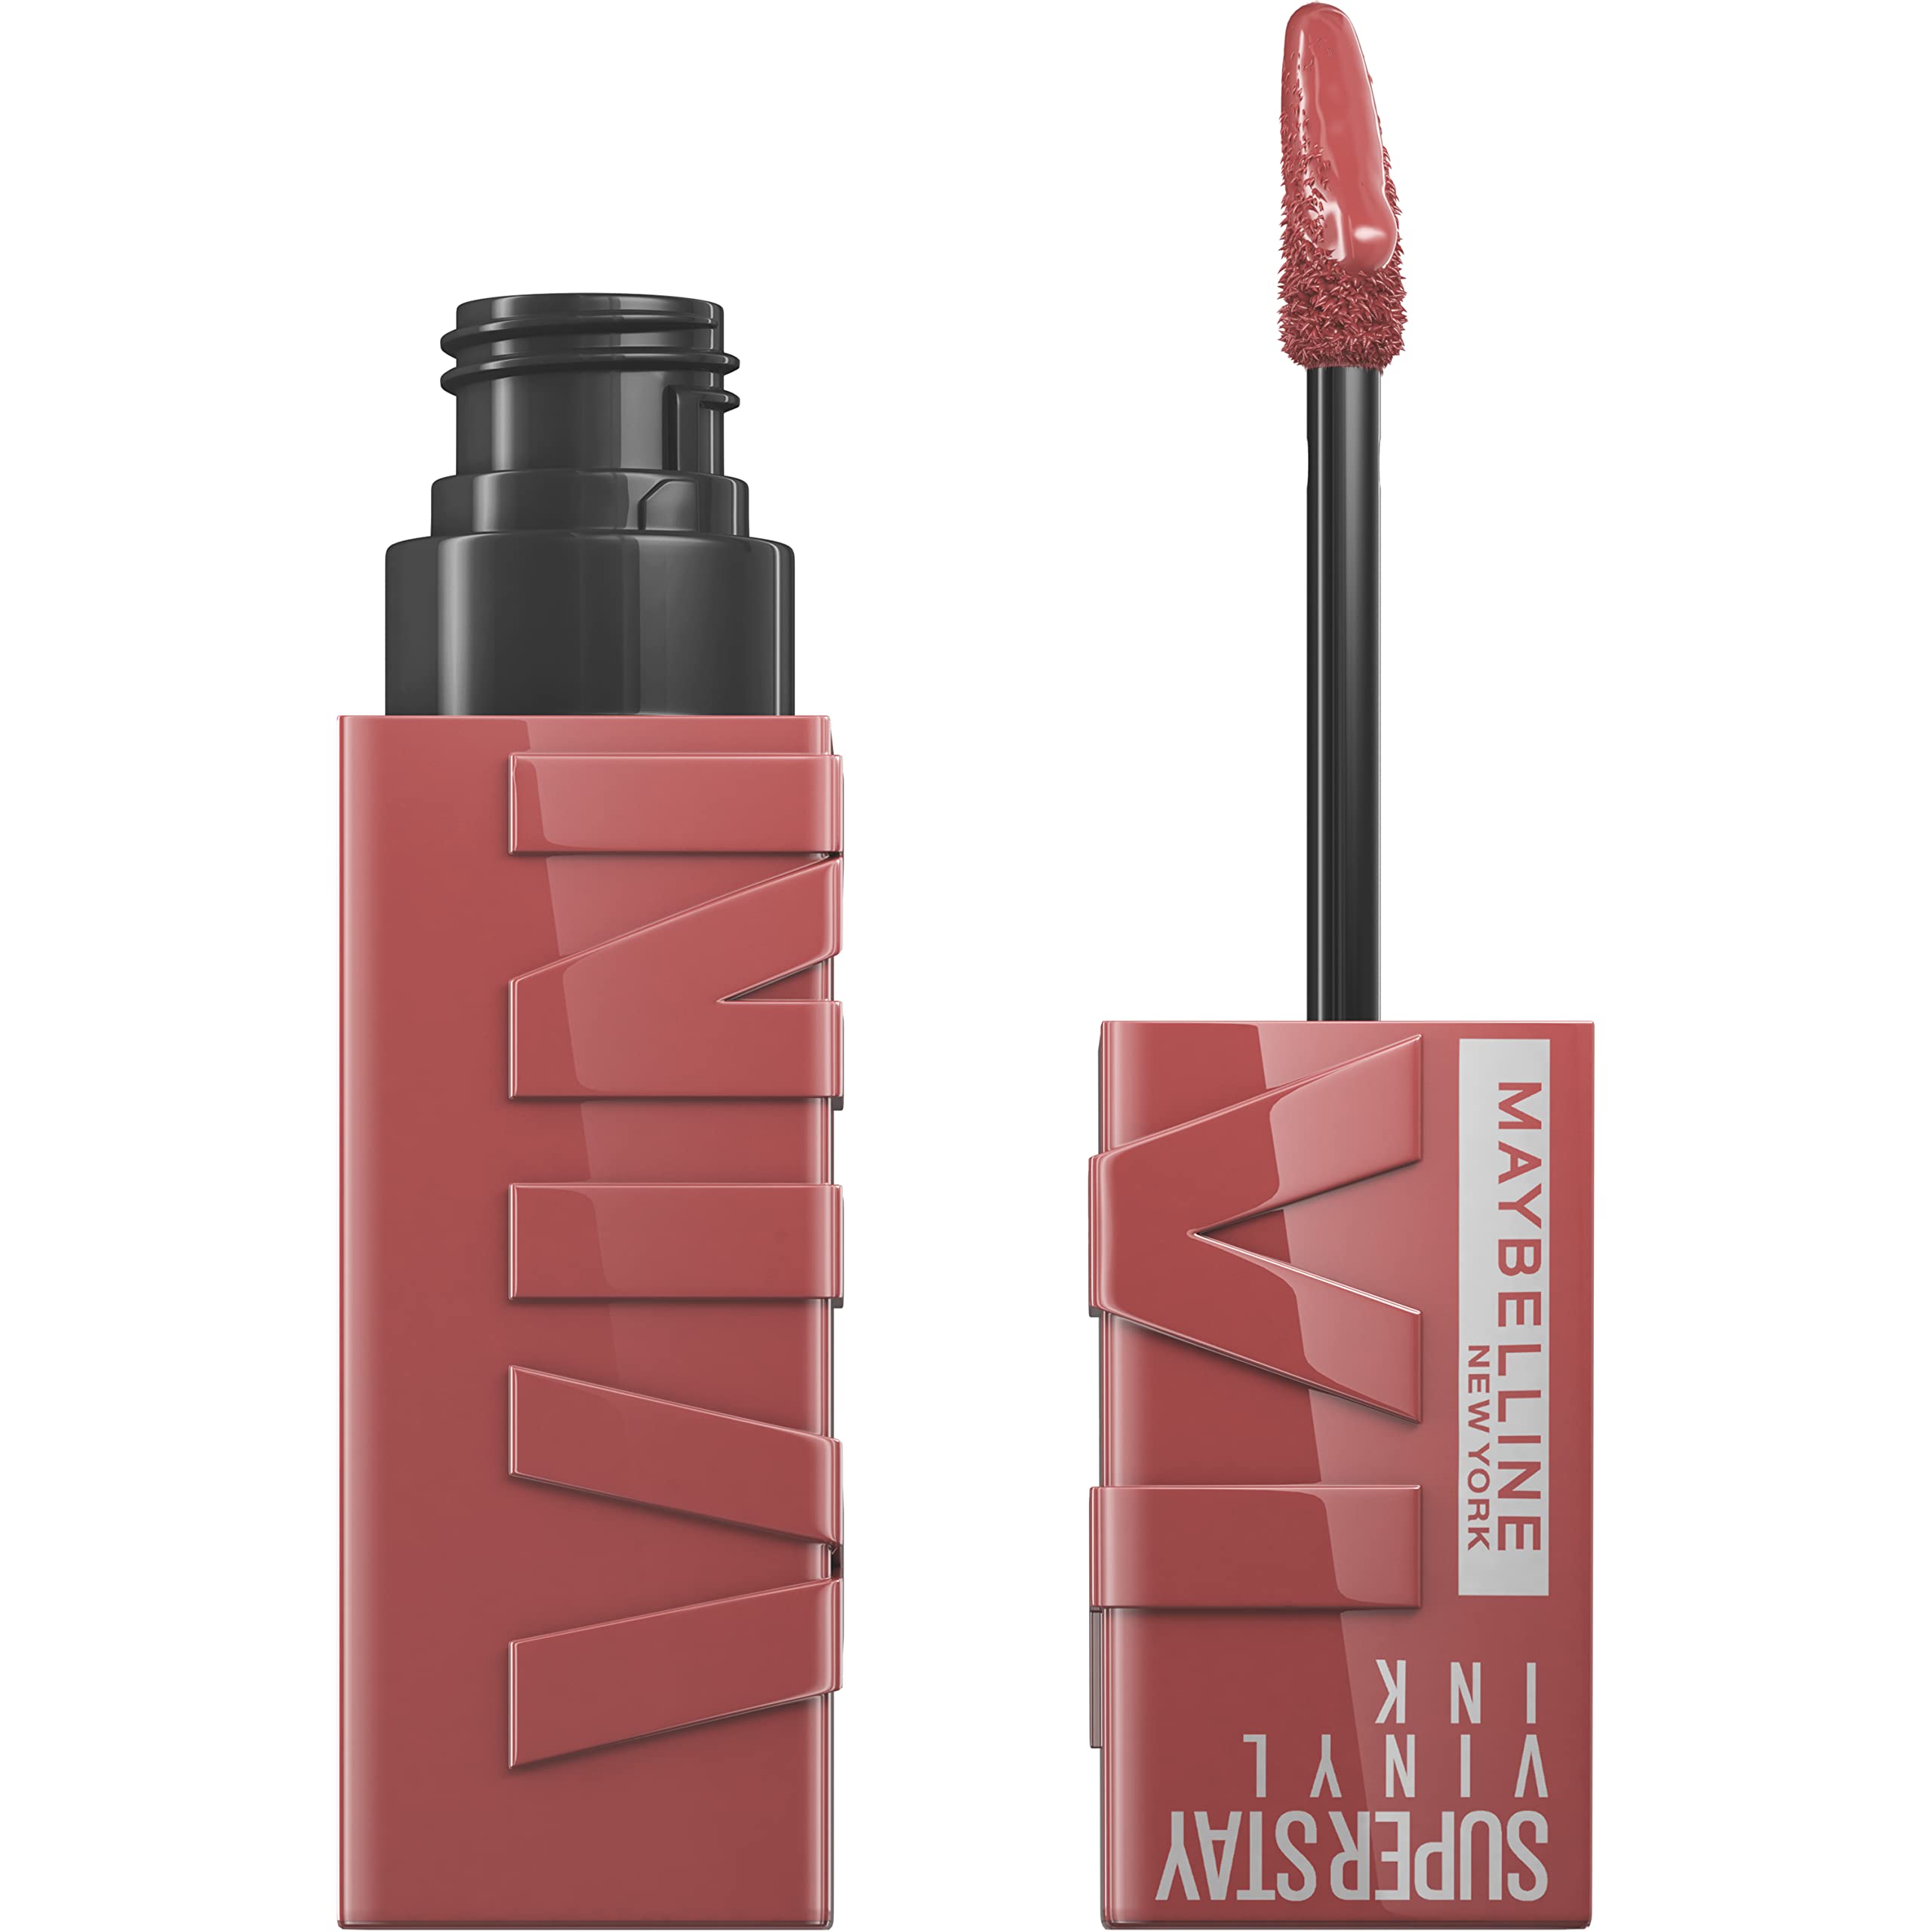 MAYBELLINE New York Super Stay Vinyl Ink Longwear No-Budge Liquid Lipcolor Makeup, Highly Pigmented Color and Instant Shine, Cheeky, Rose Nude Lipstick, 0.14 fl oz, 1 Count